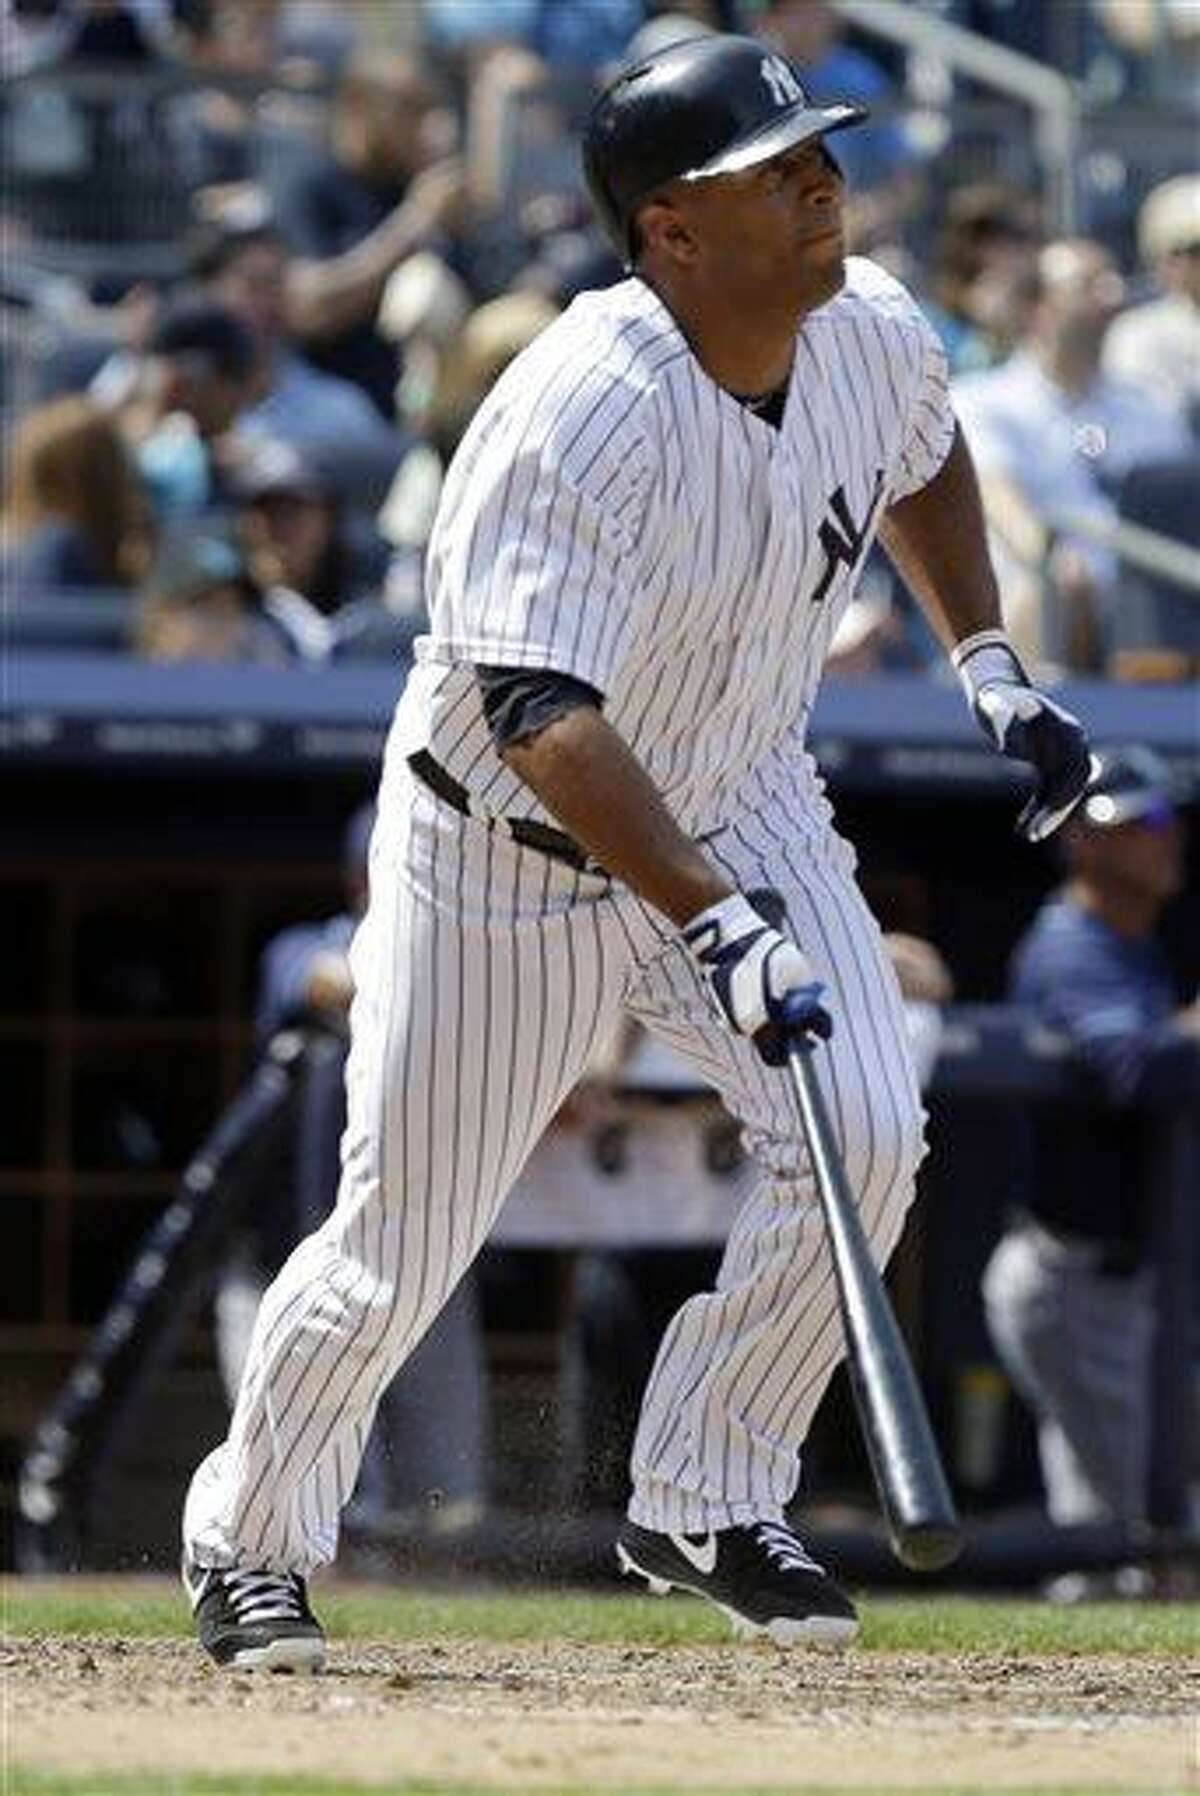 New York Yankees' Vernon Wells hits a ground-rule double to drive in three runs during the seventh inning of a baseball game against the Tampa Bay Rays Saturday, June 22, 2013, in New York. (AP Photo/Frank Franklin II)